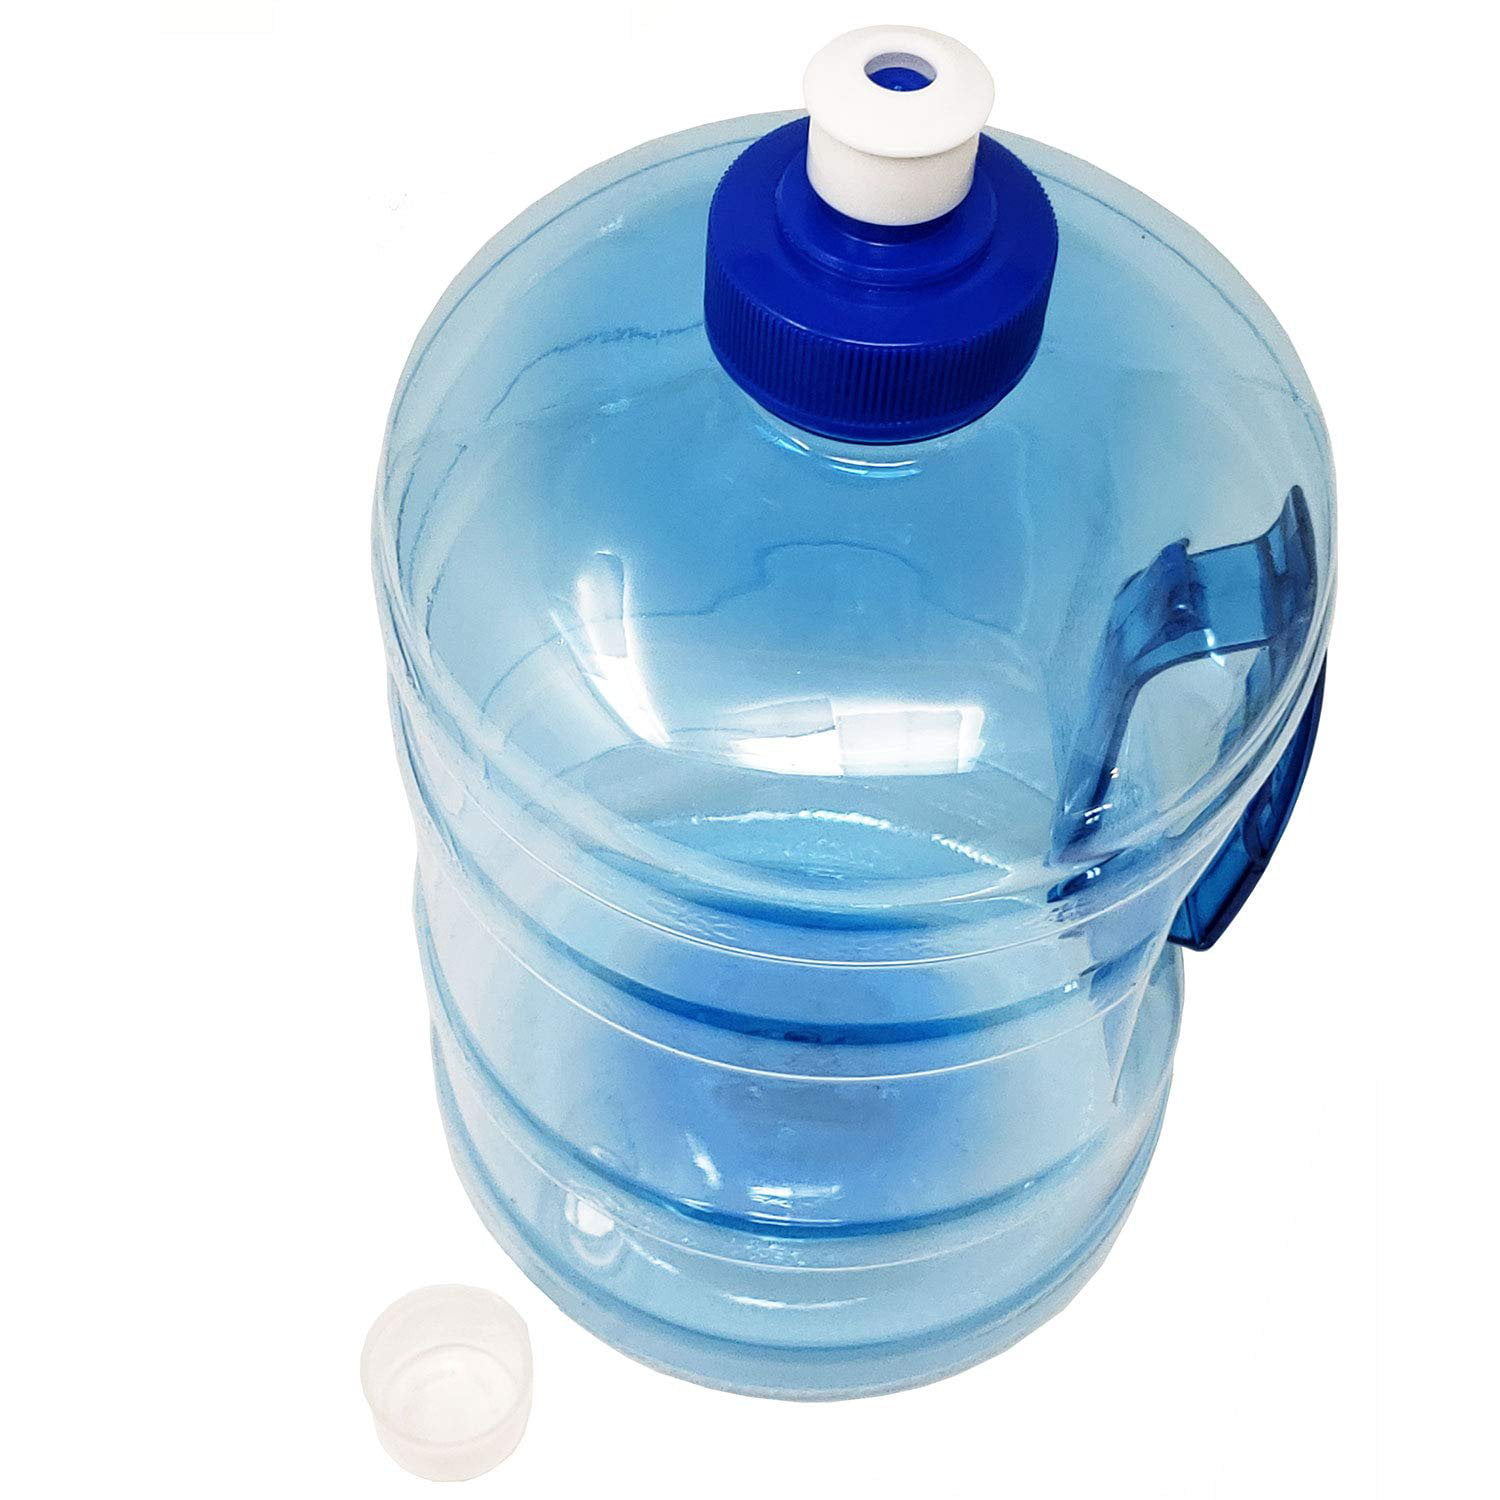 Aqua Jug Big Water Bottle, Dishwasher Safe BPA Free Drinking Water, Force Green 2.2 L, Great for Gym Fitness Workout Sports Hiking and More